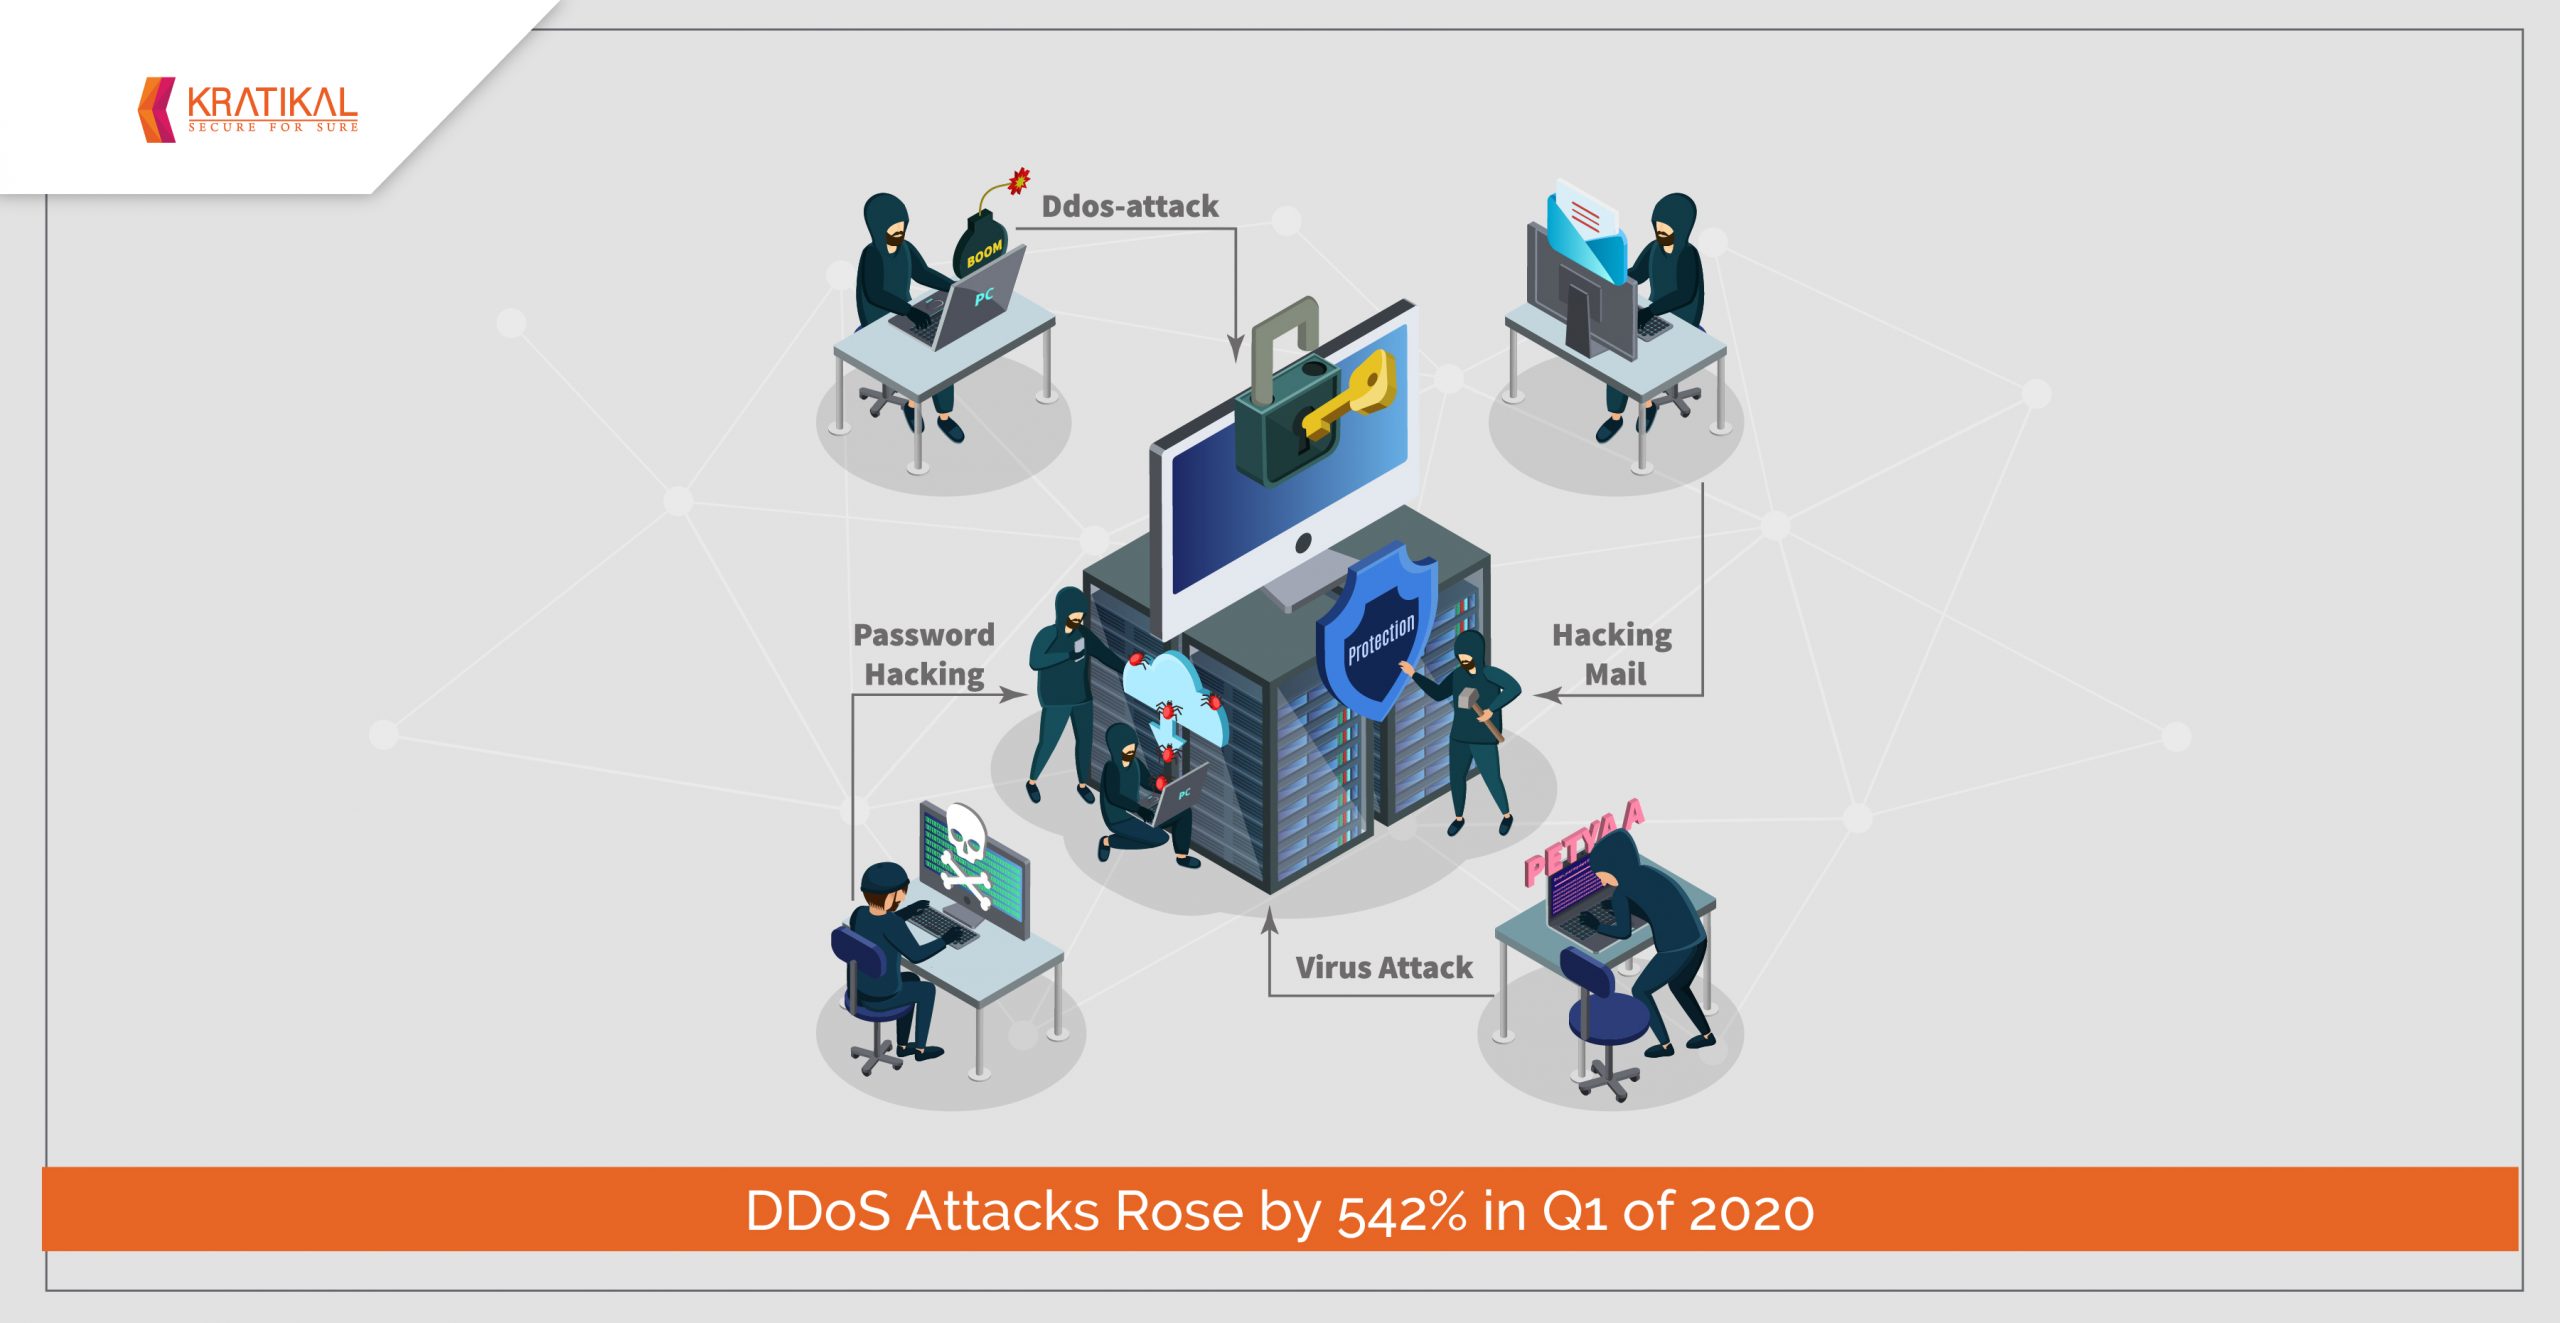 DDoS Attacks Threatening E-commerce security